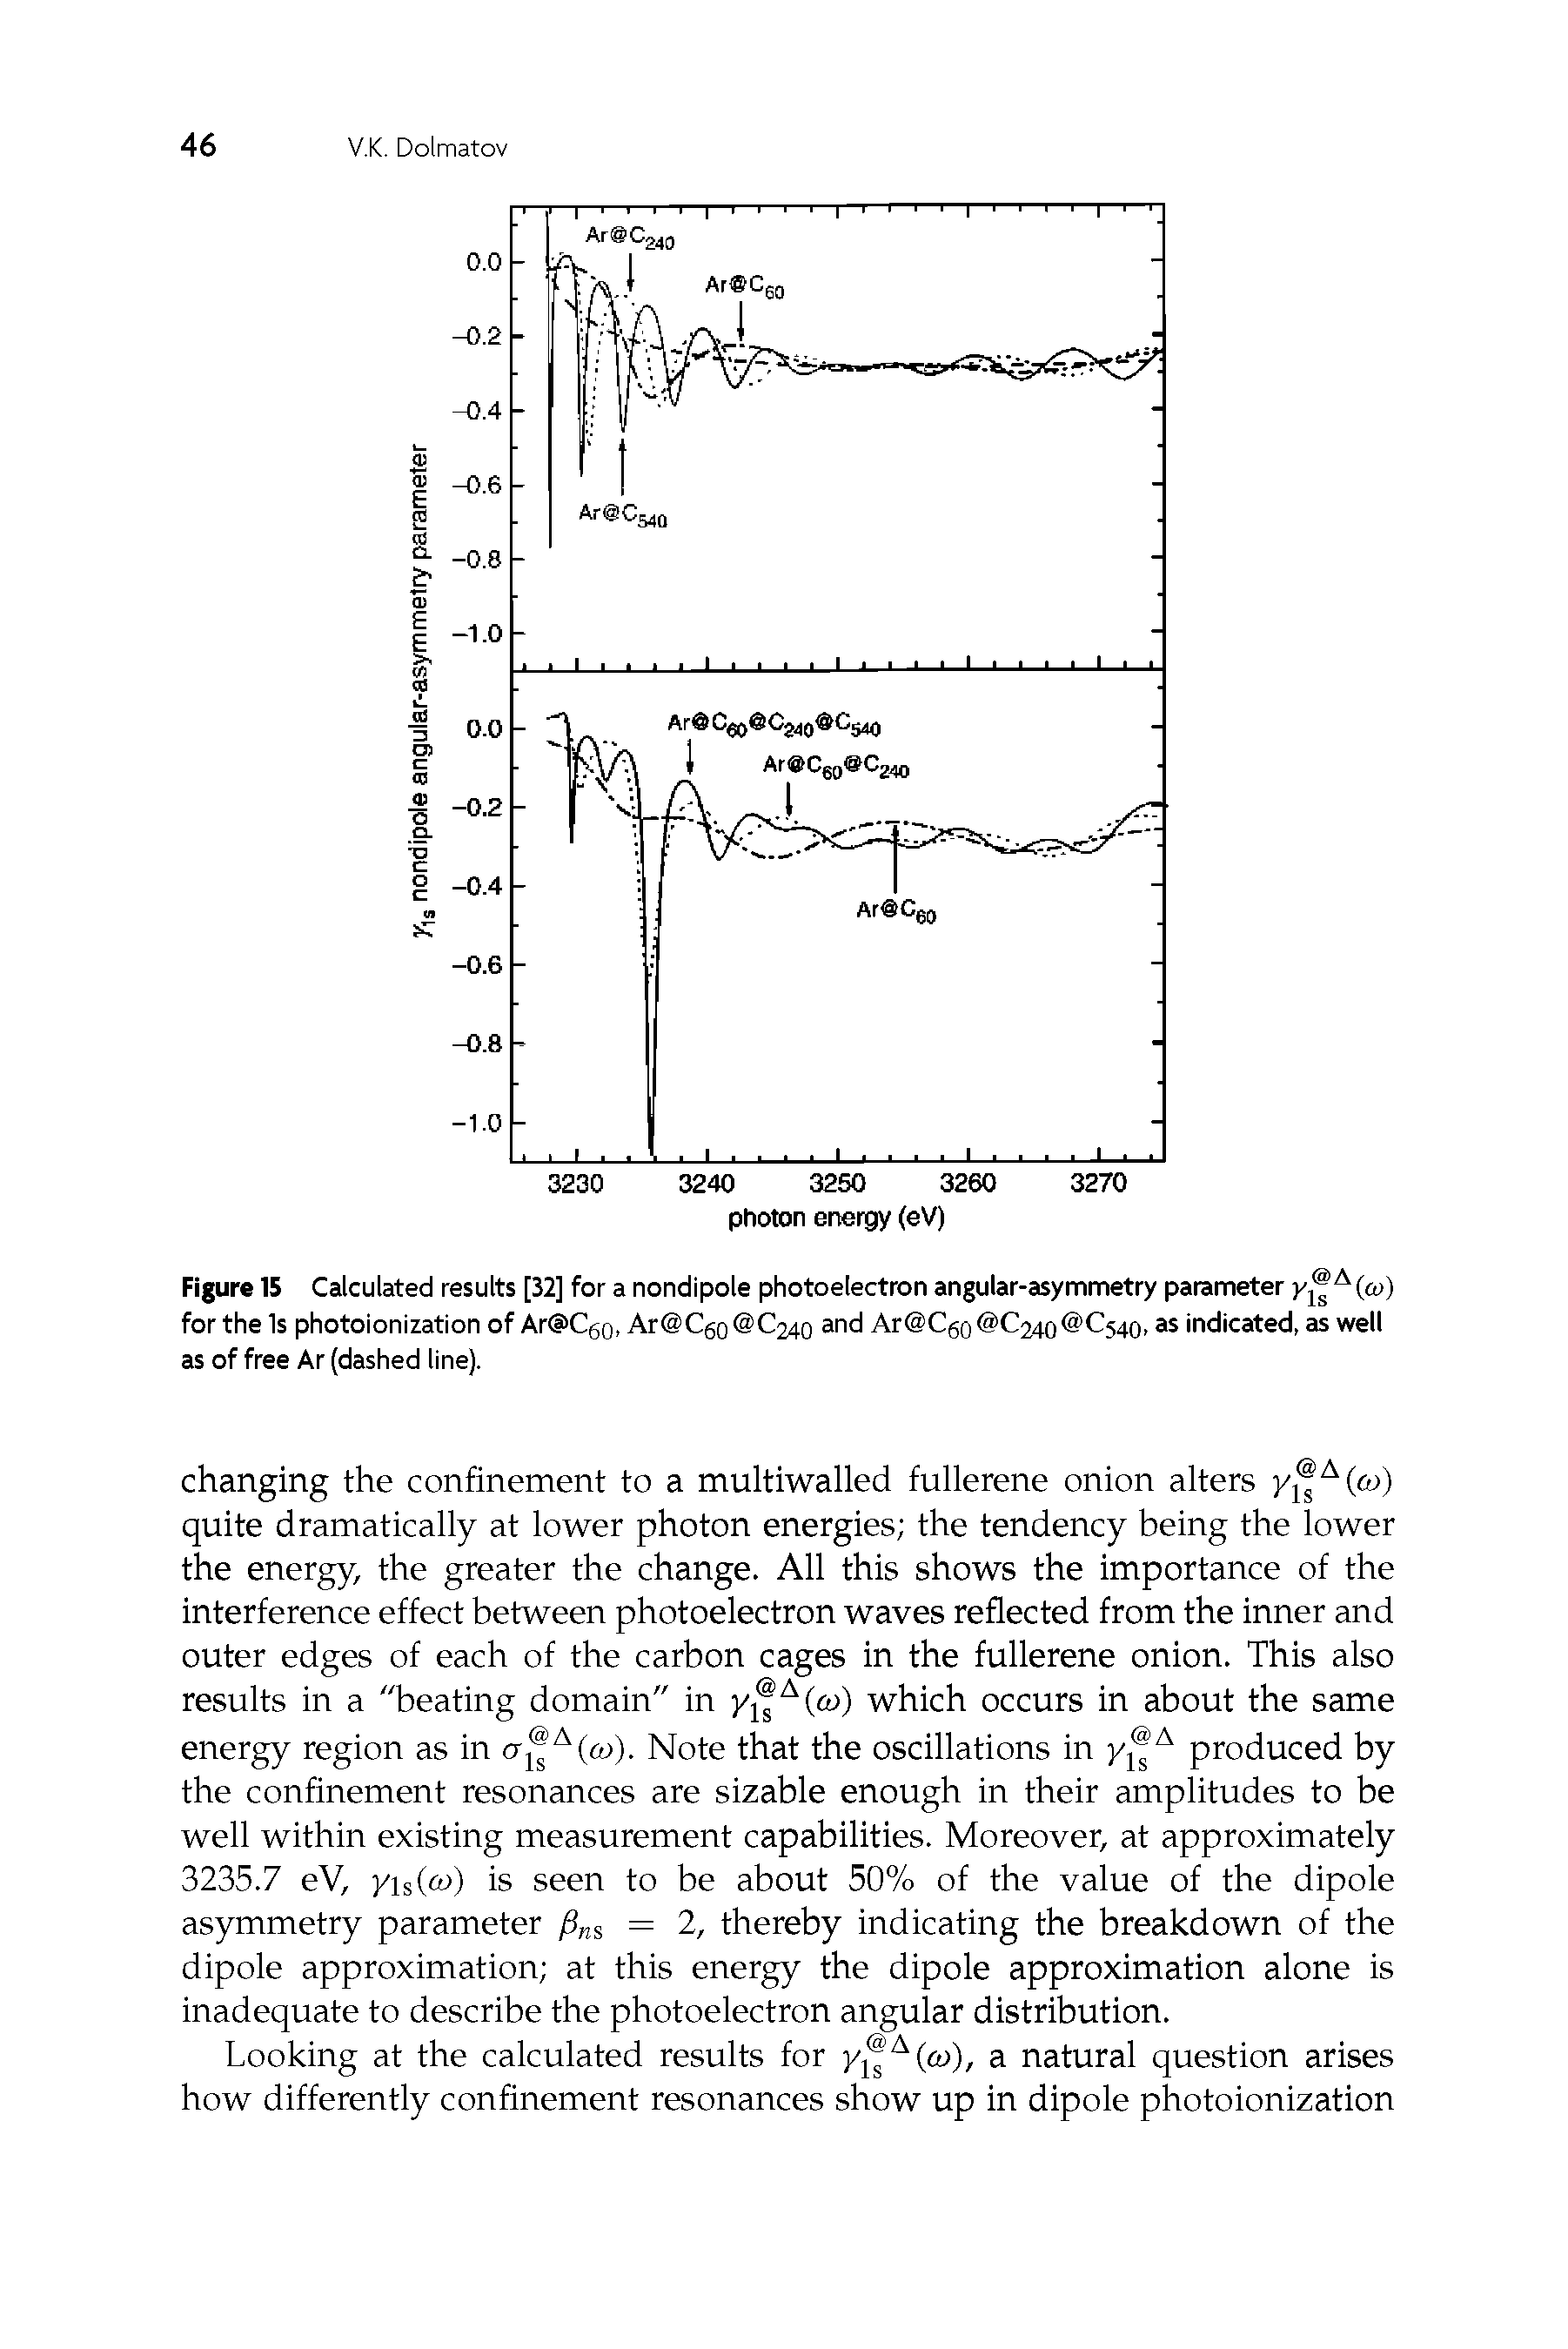 Figure 15 Calculated results [32] for a nondipole photoelectron angular-asymmetry parameter Ki aM for the Is photoionization of Ard>C6o, Ar Cgo C24o and Ar Cgo C24o C54o, as indicated, as well as of free Ar (dashed line).